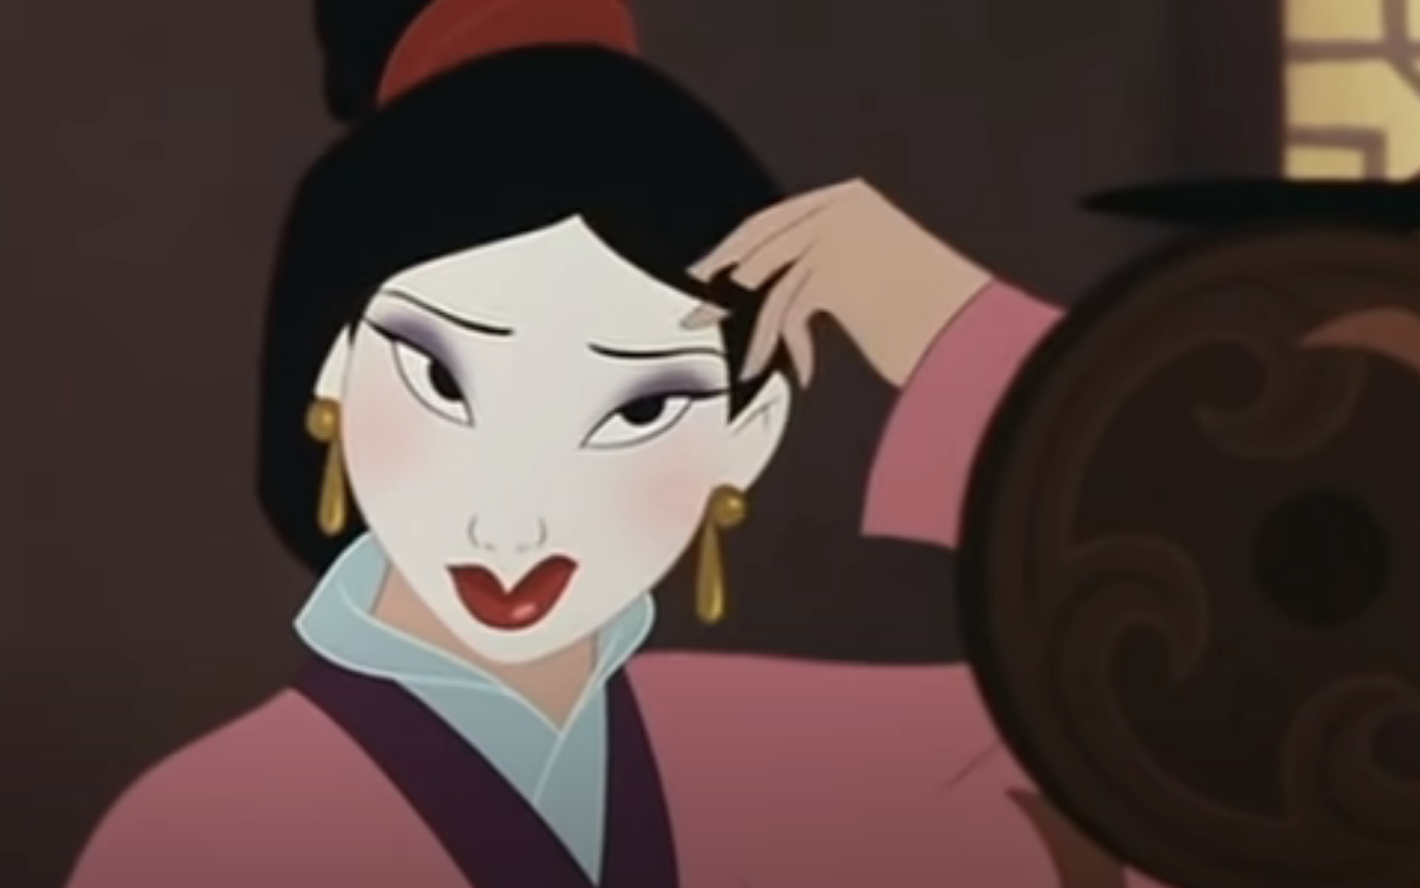 Animated character with hairpin and earrings looking into a mirror; expressing contemplation